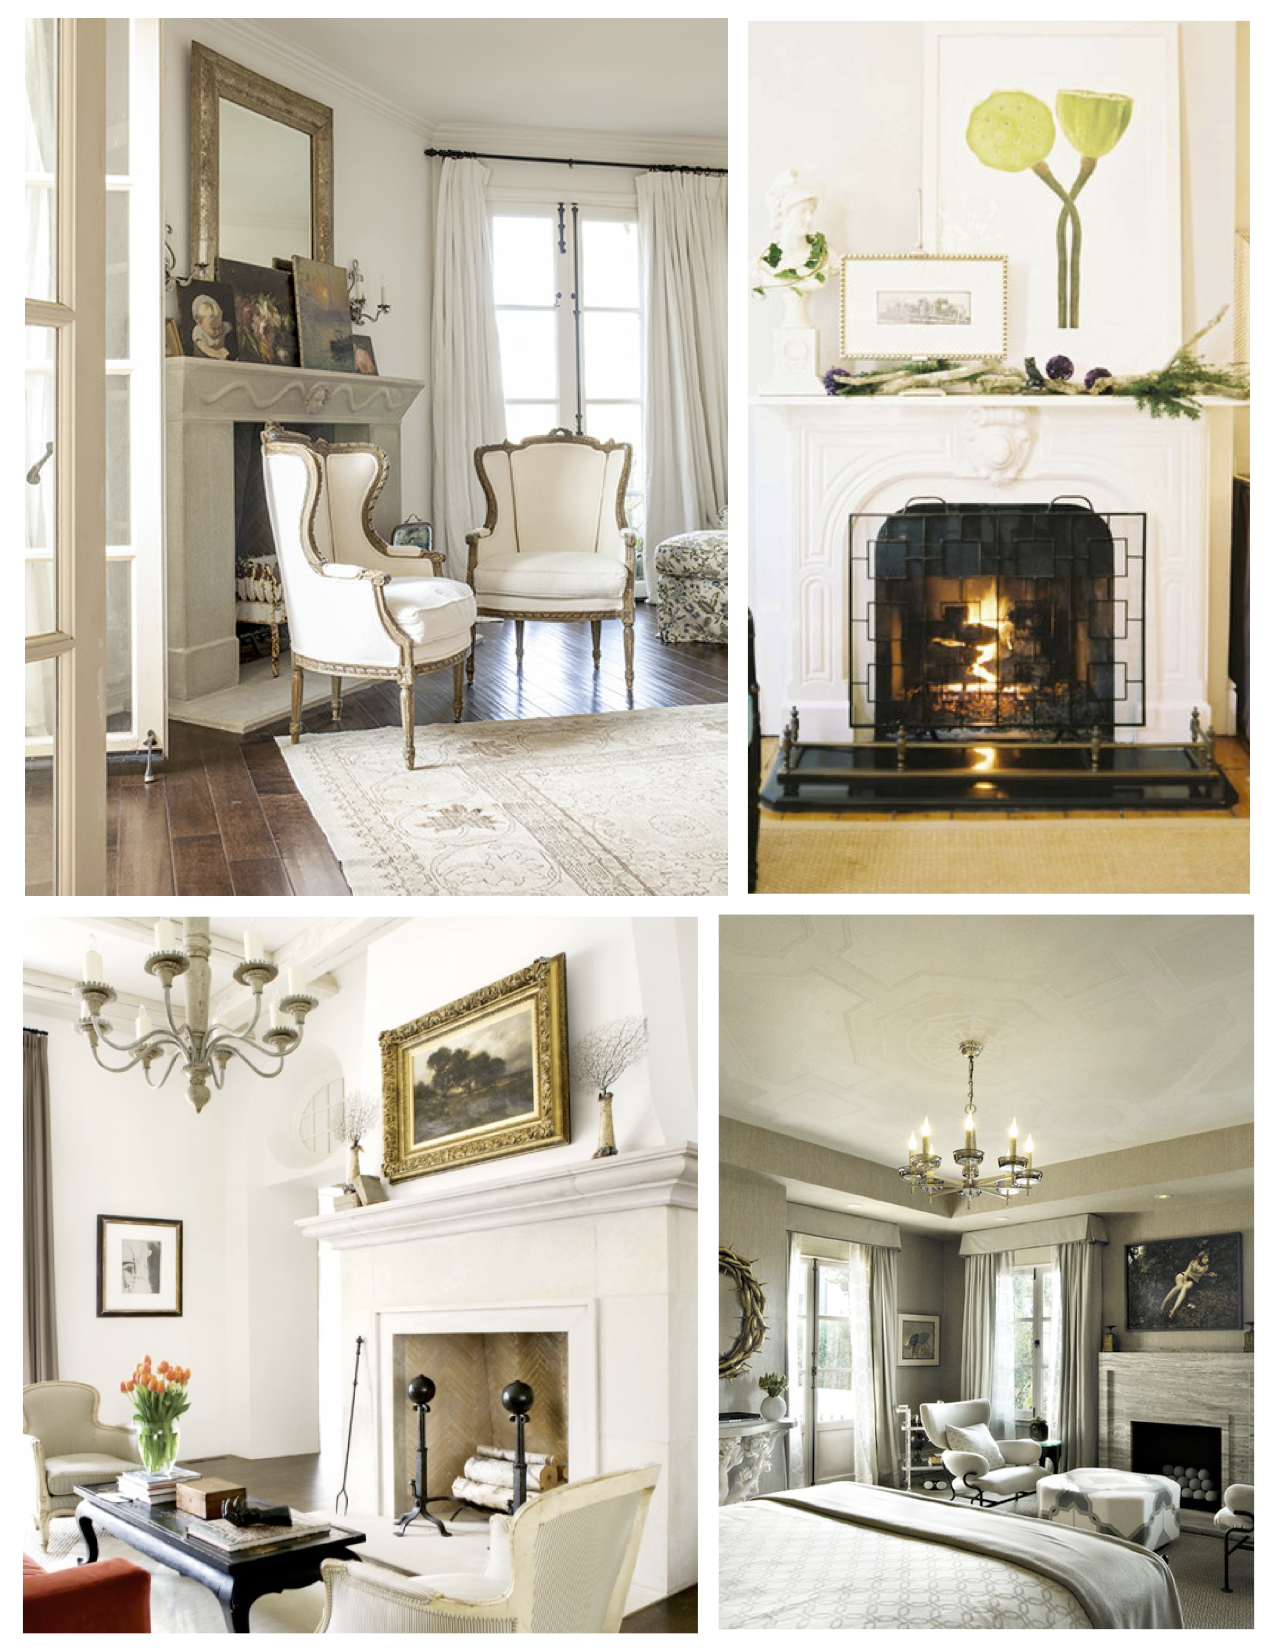 A Timeless Warming Trend Within The Interior:  The Fireplace